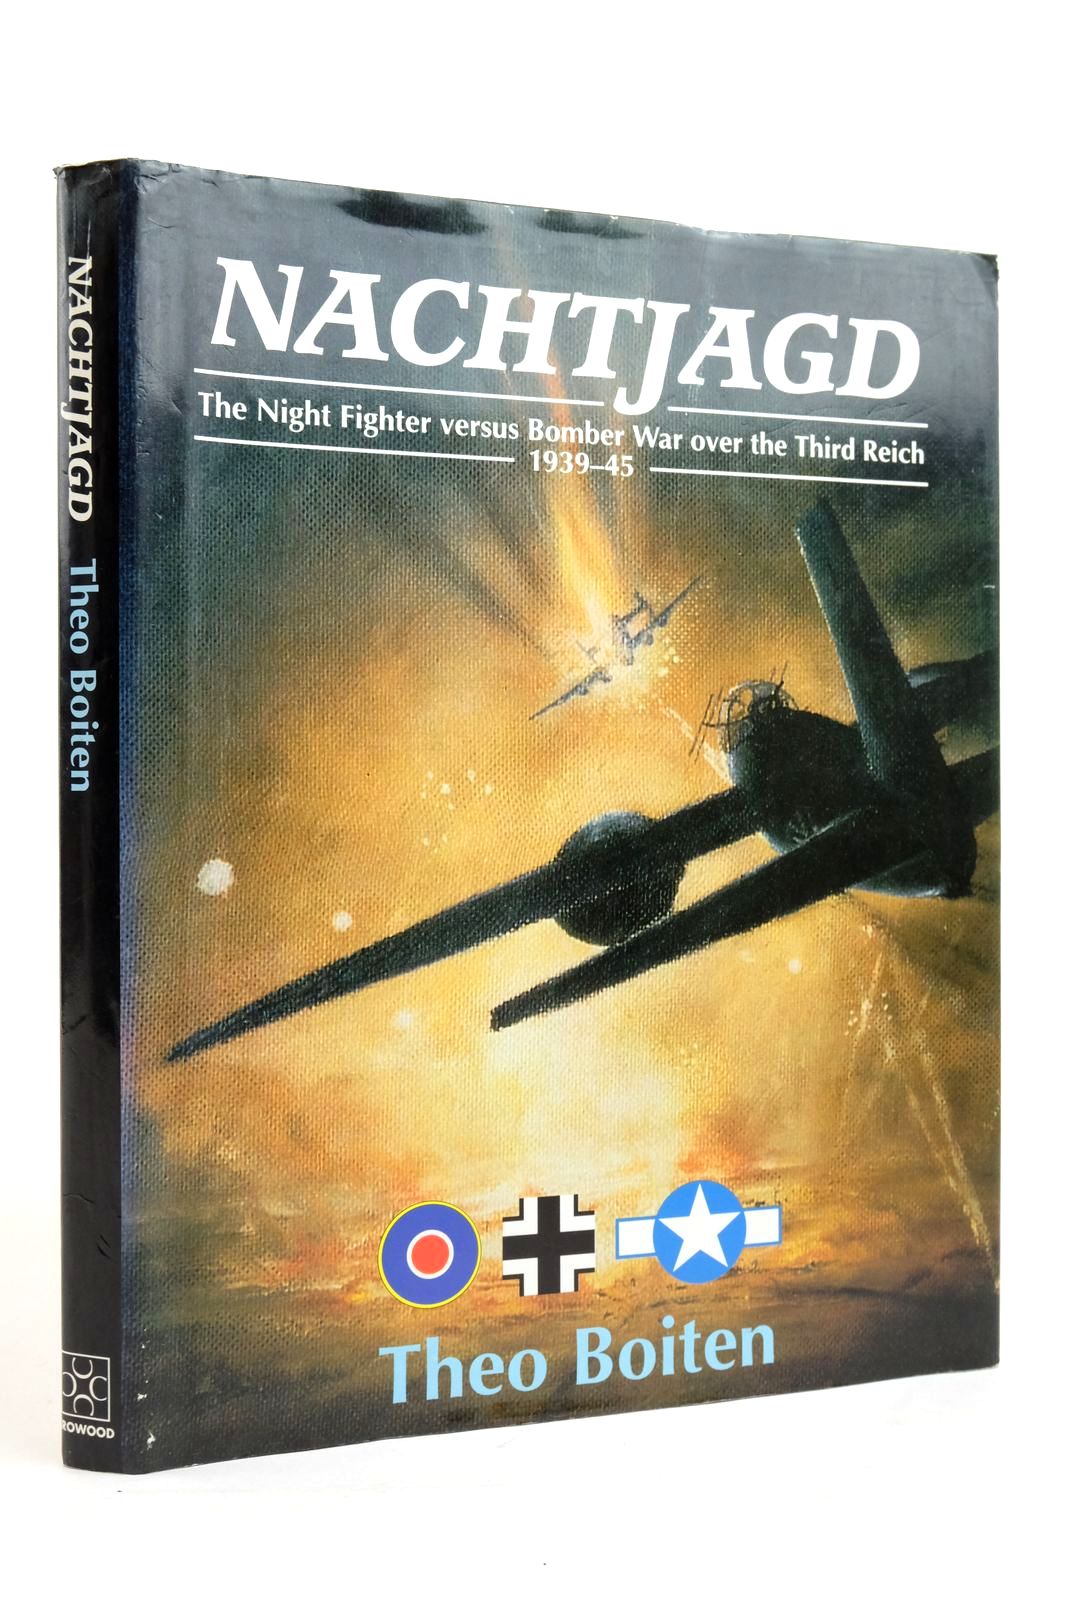 Photo of NACHTJAGD: THE NIGHT FIGHTER VERSUS BOMBER WAR OVER THE THIRD REICH 1939-45 written by Boiten, Theo published by The Crowood Press (STOCK CODE: 2136236)  for sale by Stella & Rose's Books